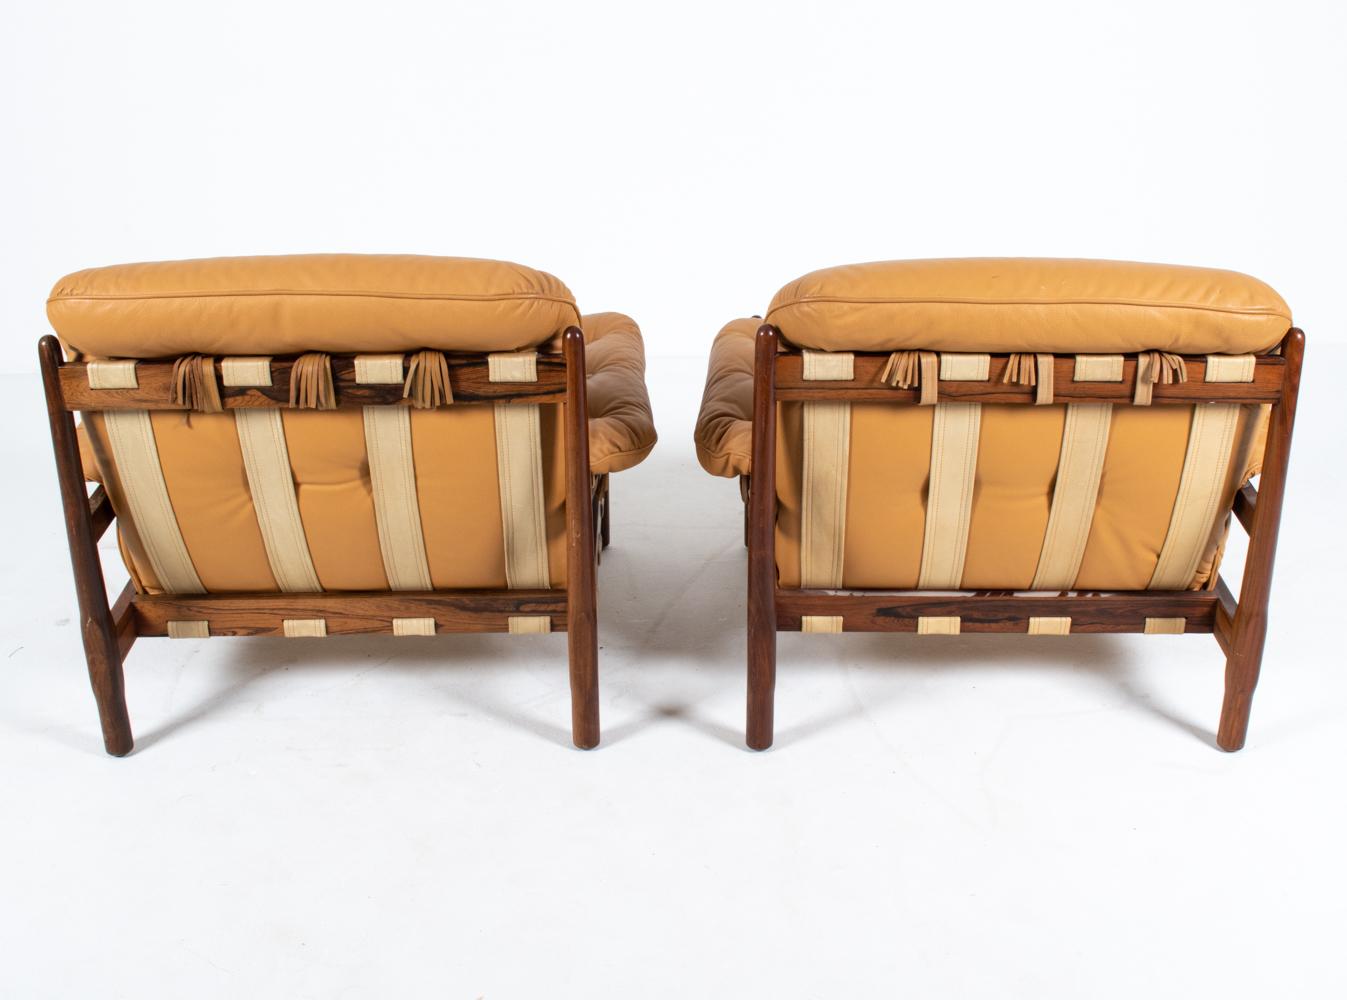 Pair of Brazilian Modernist Rosewood & Leather Easy Chairs, circa 1970s For Sale 6